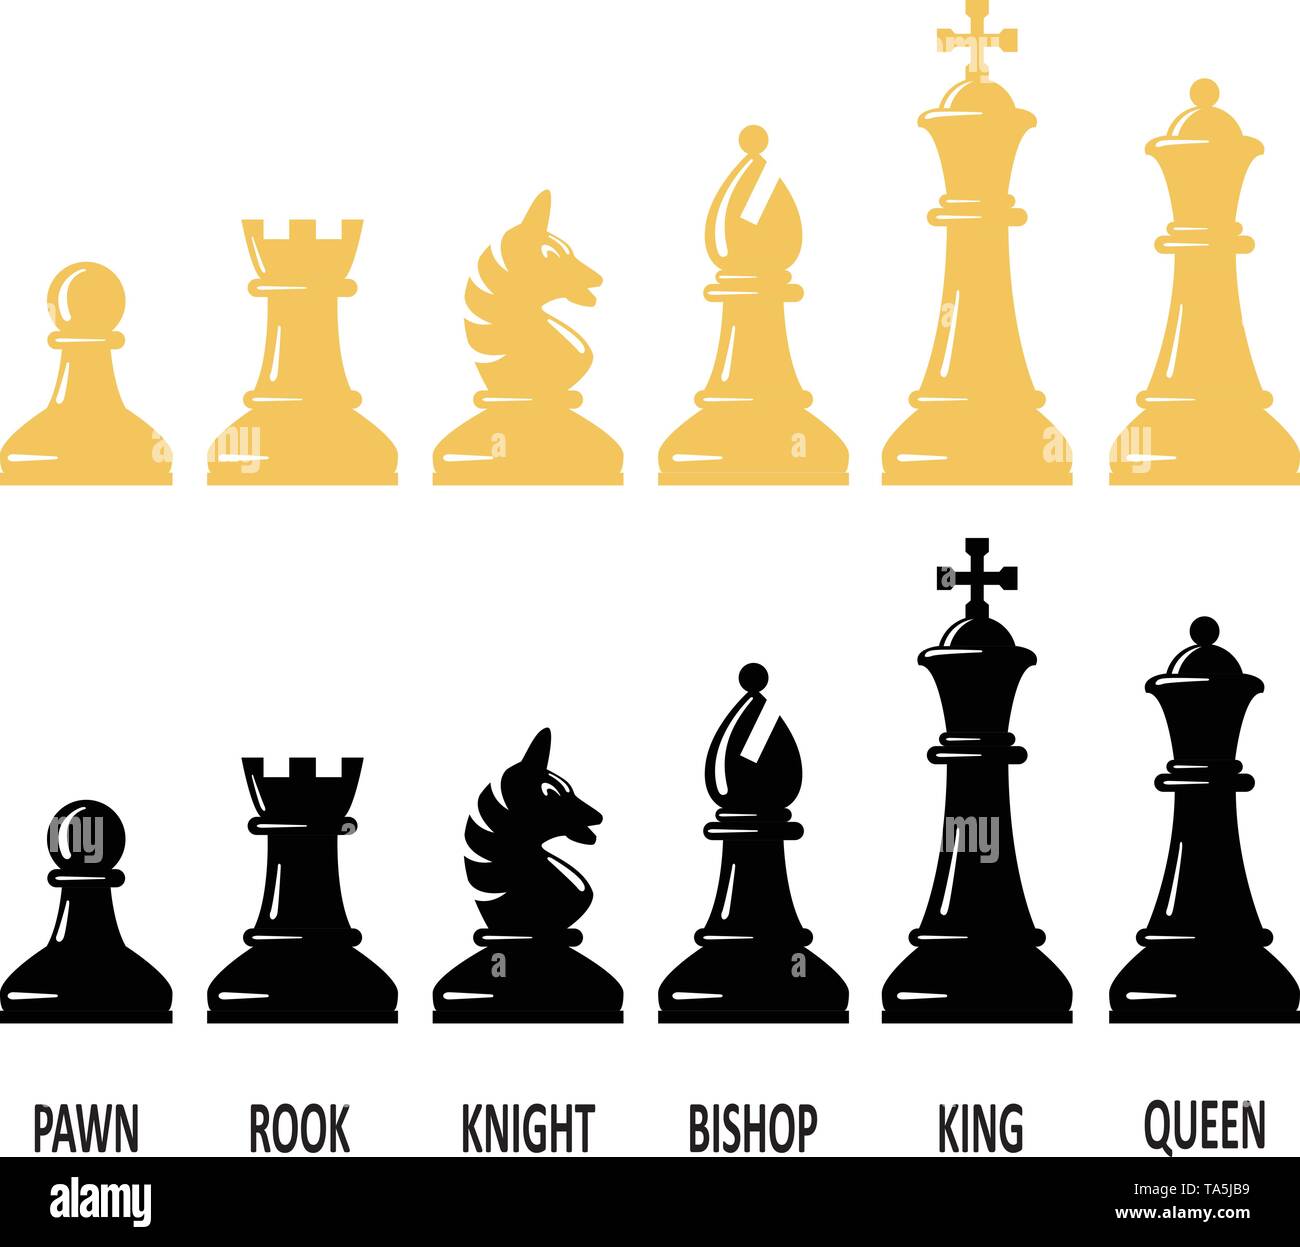 Games Chess Queen King Checkmate Board Game Rook Knight Pawn